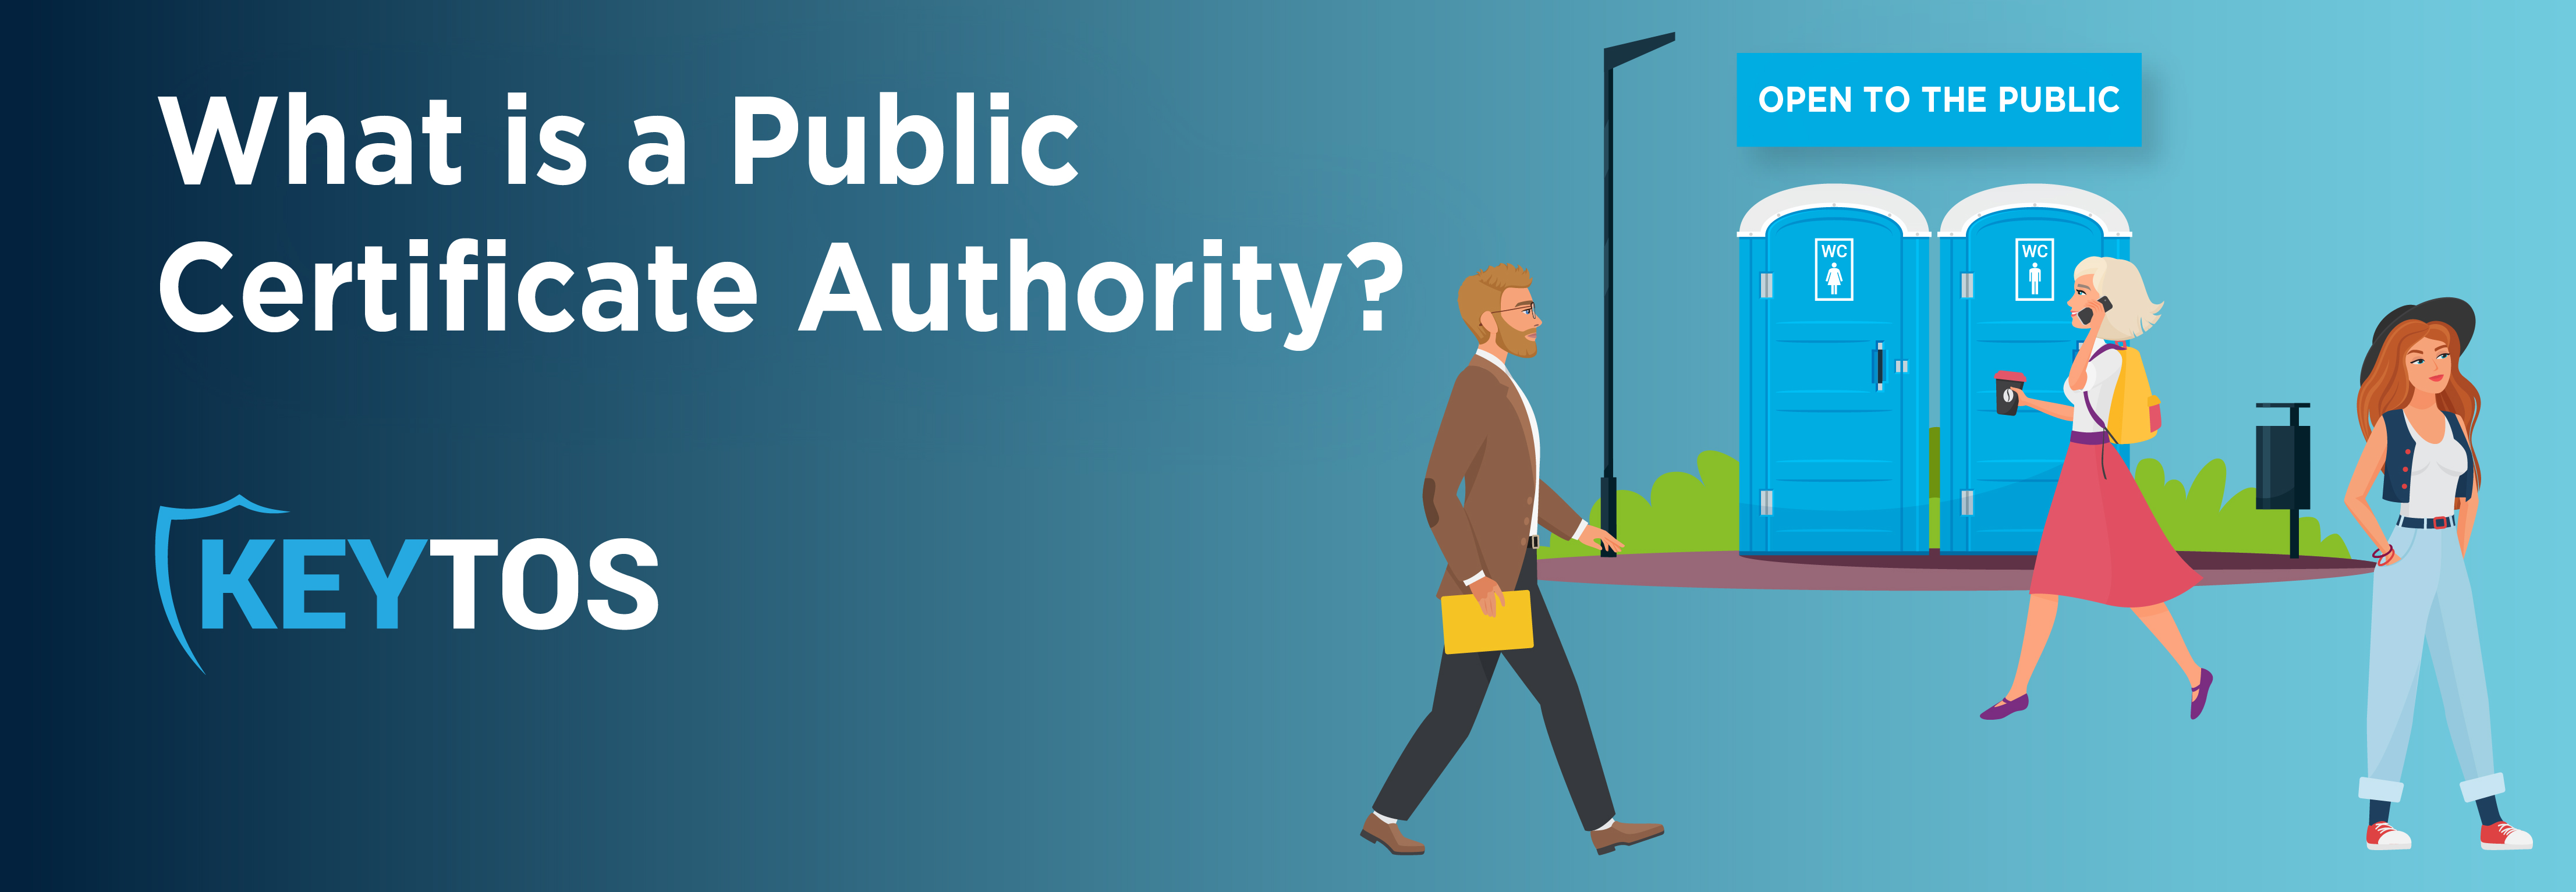 What is a Public Certificate Authority?